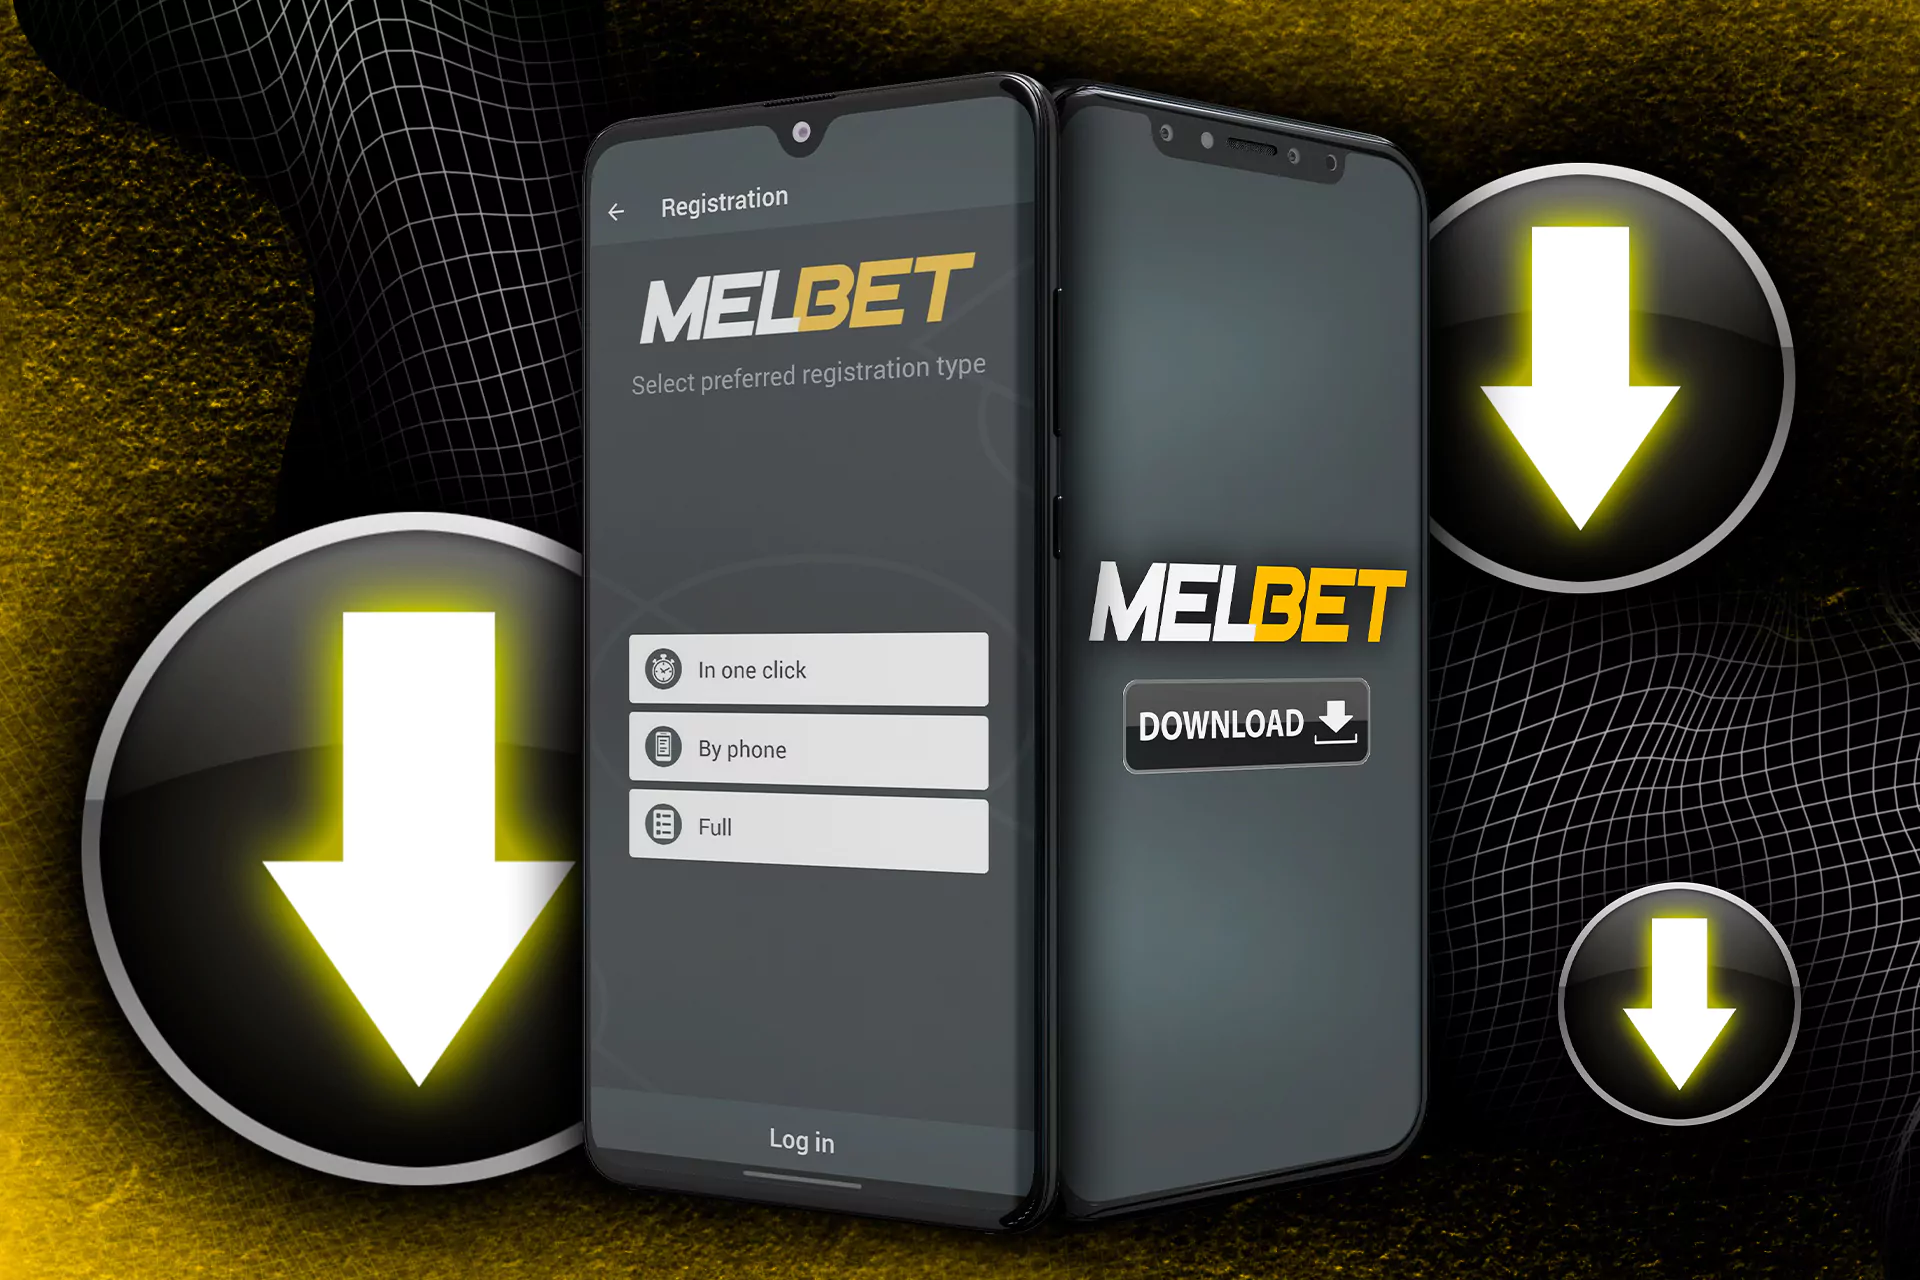 Download and install the Melbet app on Android or iOS.